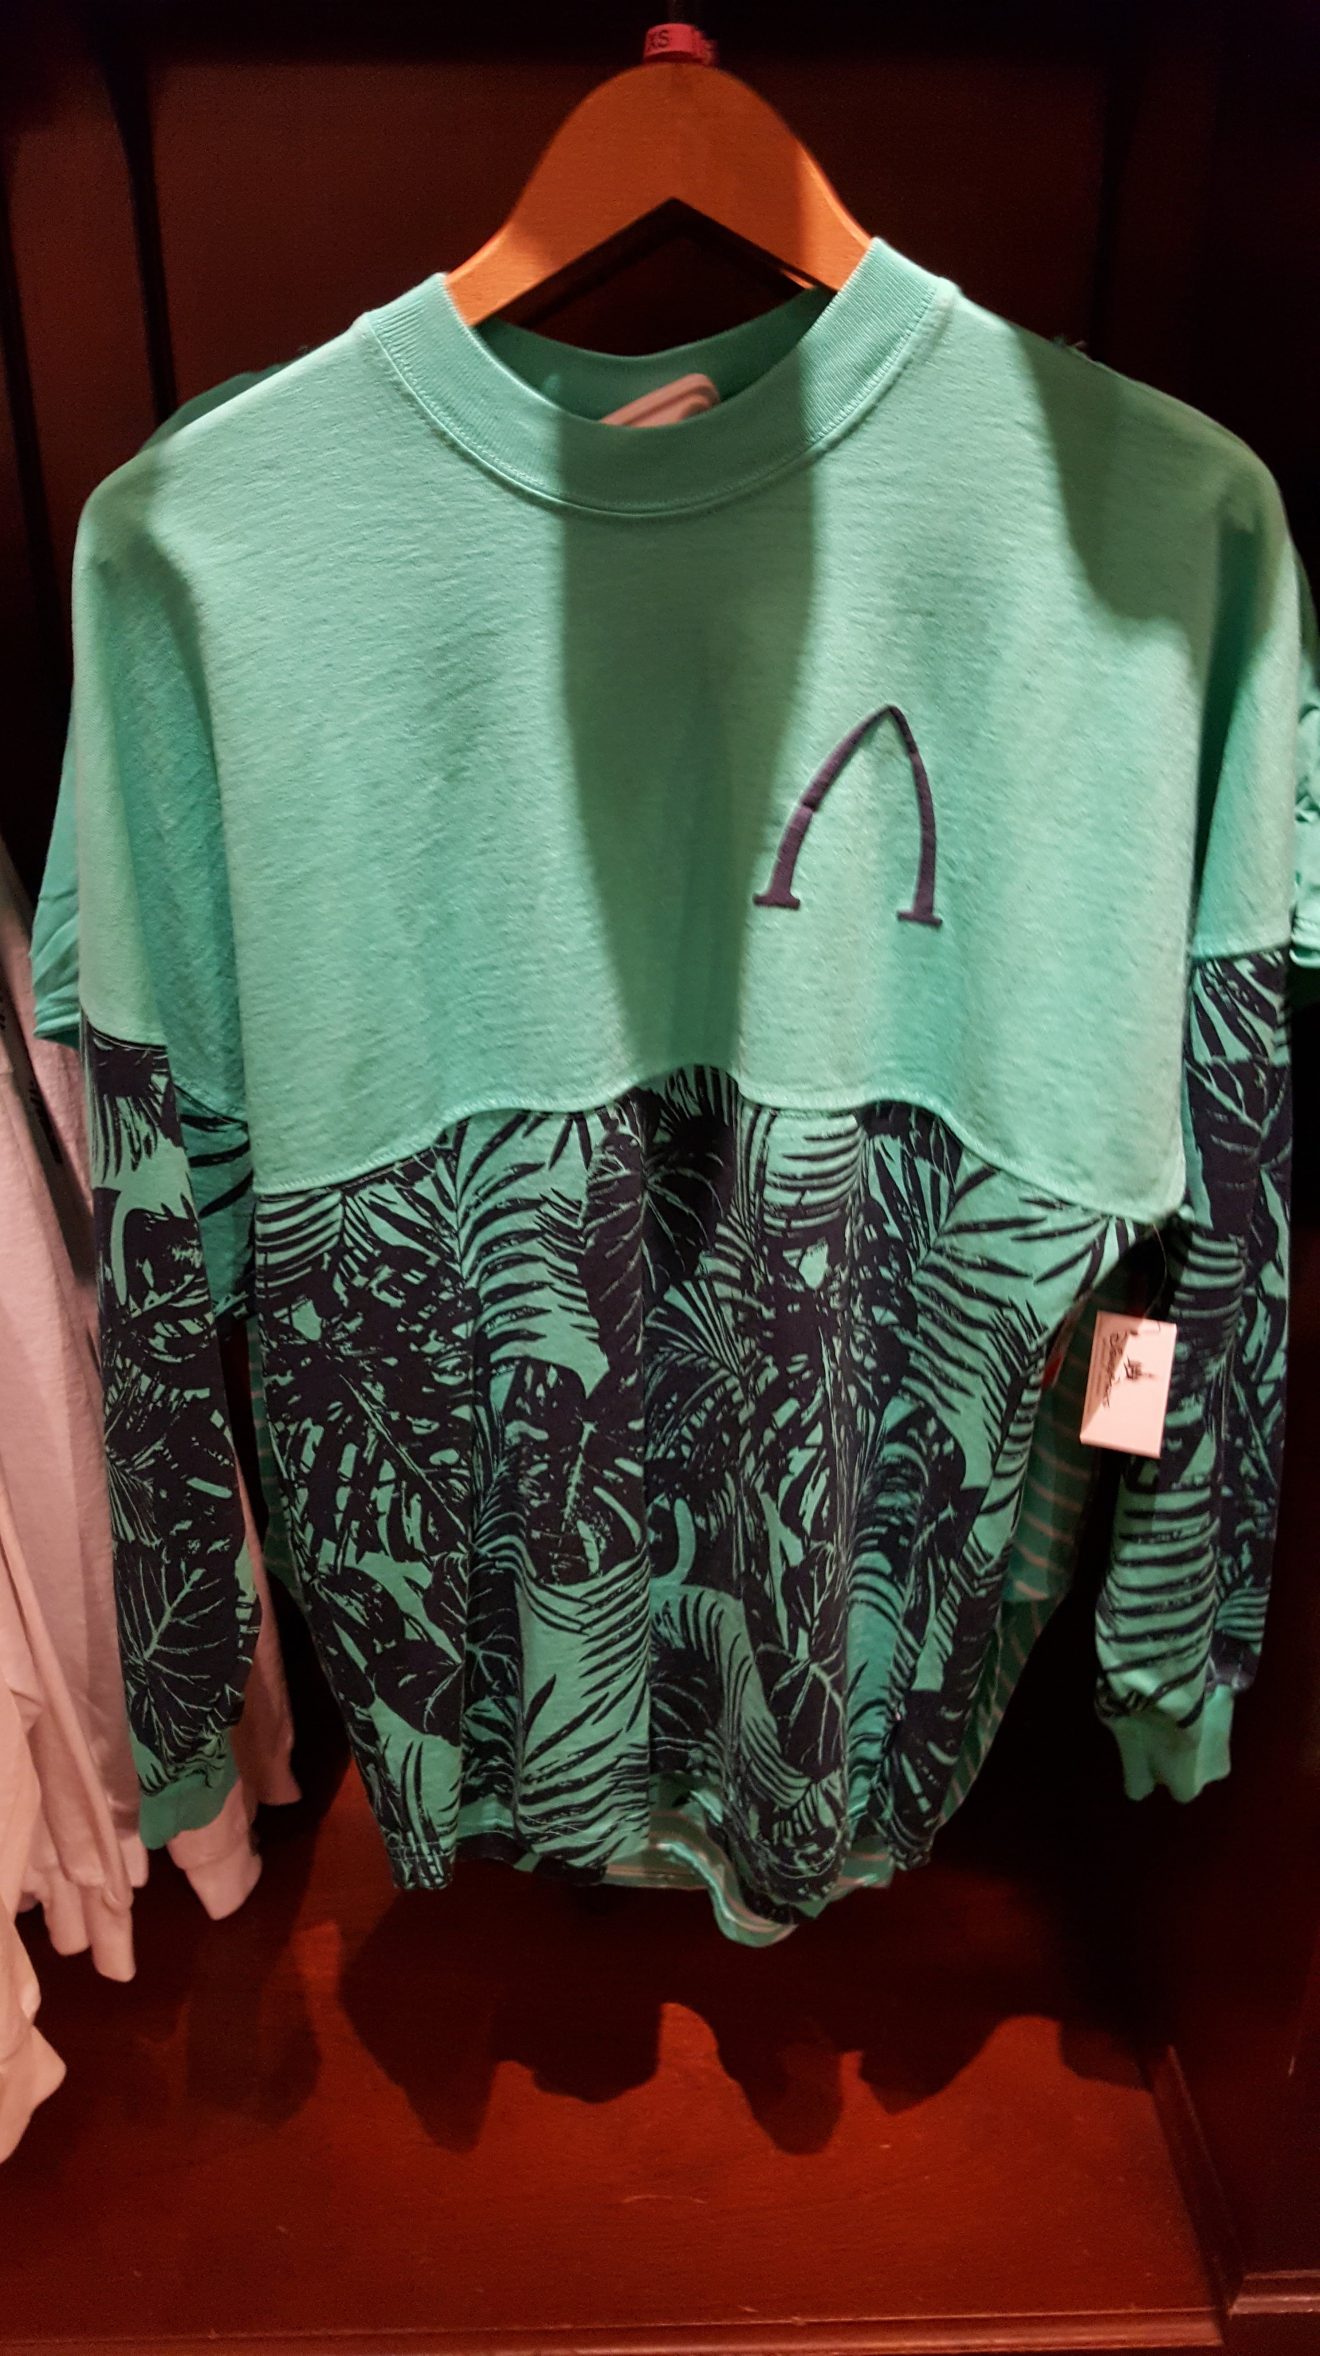 Bring The Aloha Home From Aulani With This Fabulous Spirit Jersey!